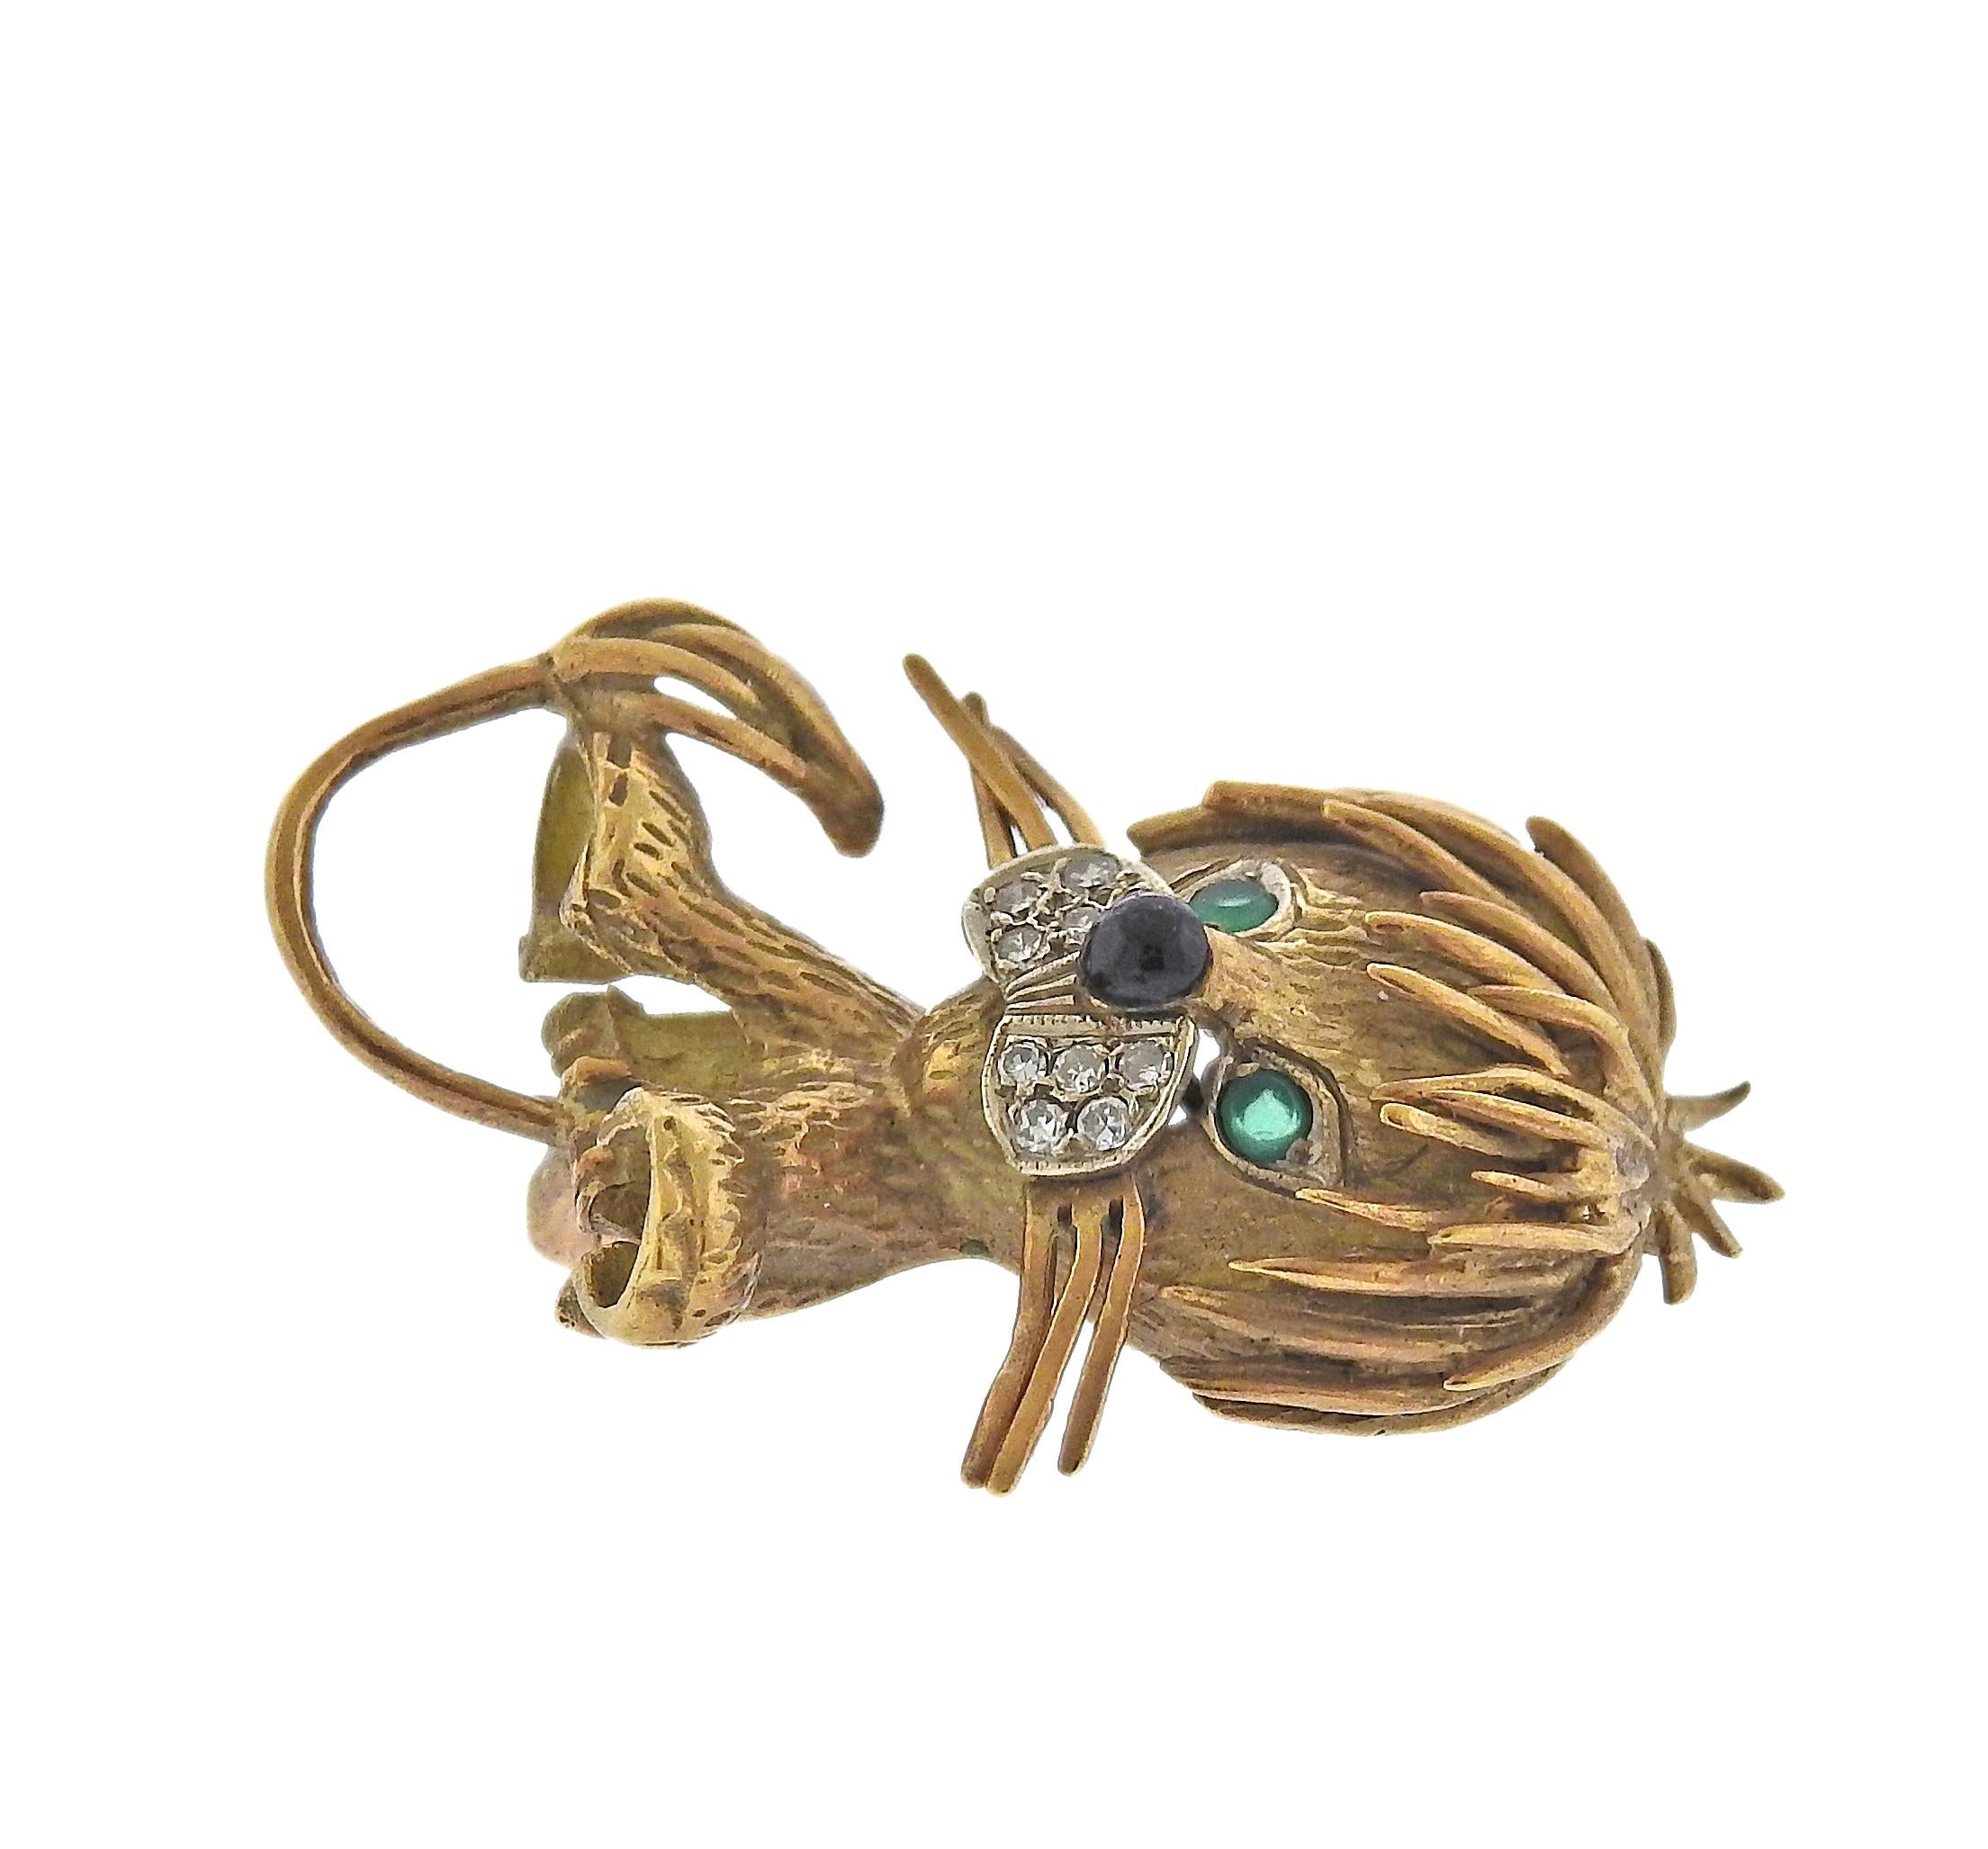 Vintage, circa 1960s 18k gold lion brooch, adorned with diamonds, emerald eyes and onyx nose. Brooch measures 34mm x 22mm. Marked 18k. Weight - 8.7 grams.